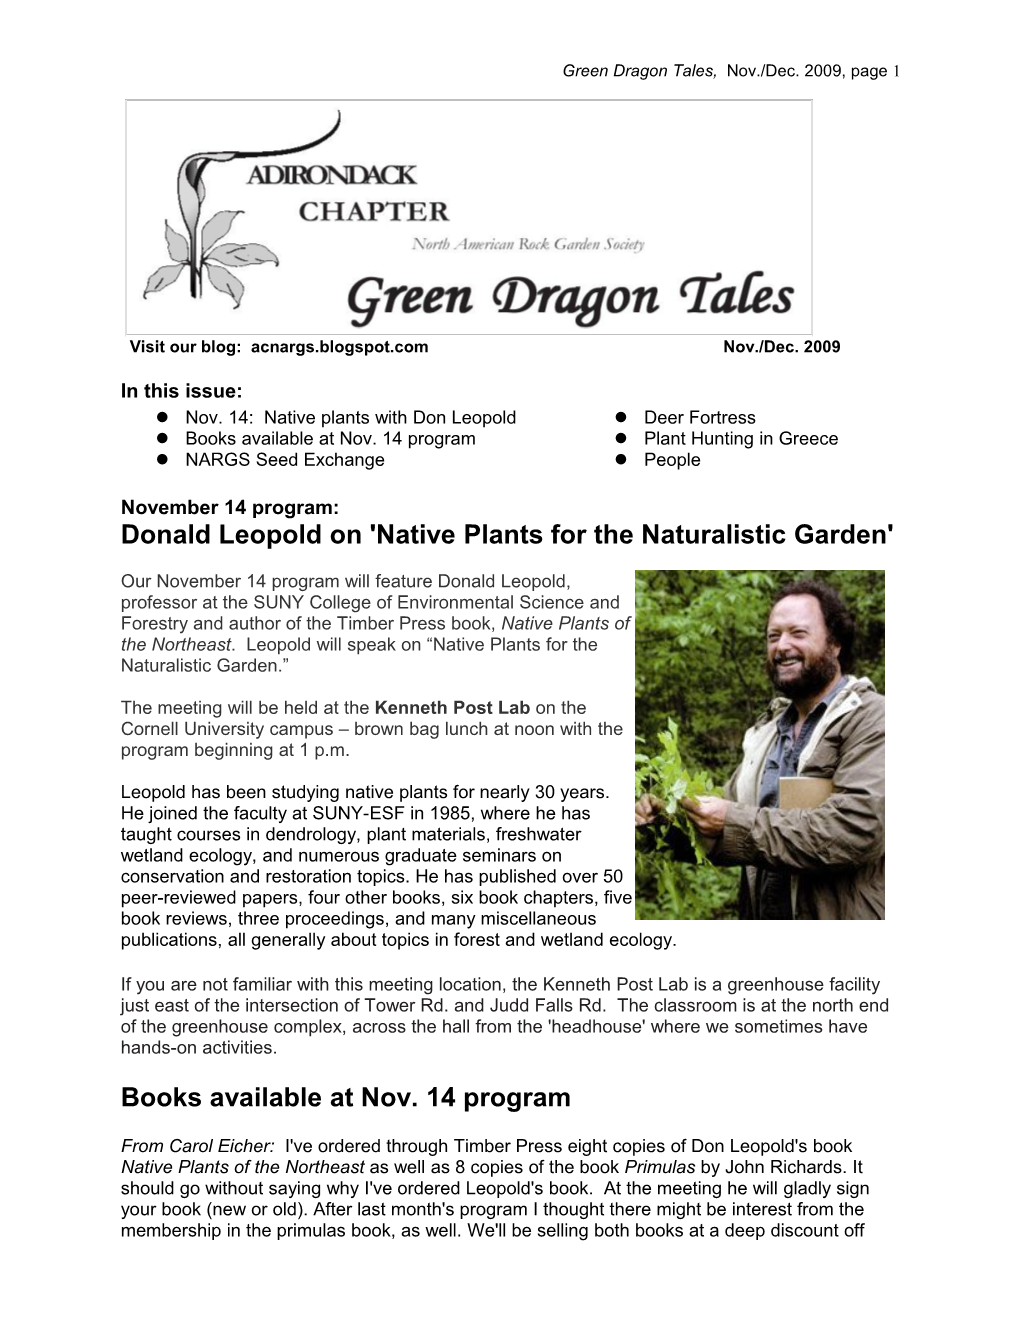 Donald Leopold on 'Native Plants for the Naturalistic Garden' Books Available at Nov. 14 Program